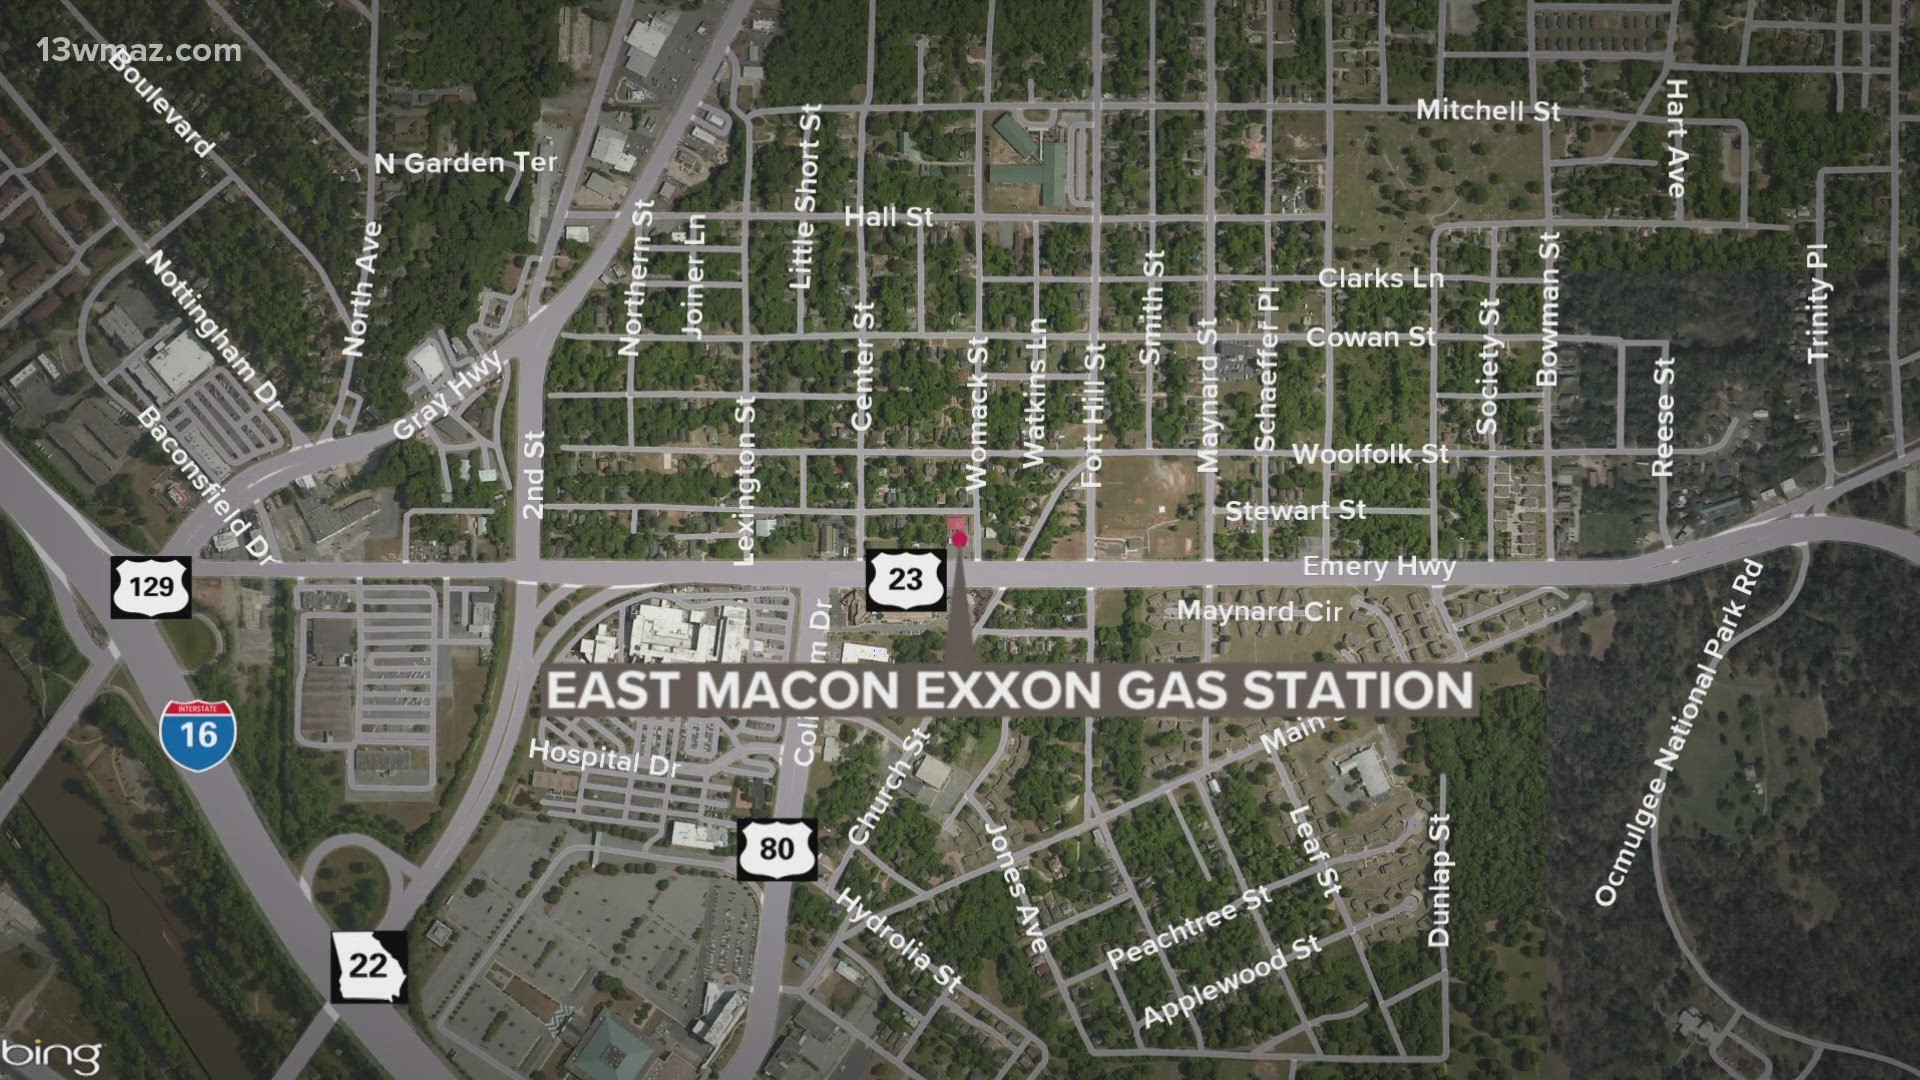 Bibb deputies were called out to a Macon gas station after getting reports about a stolen car.